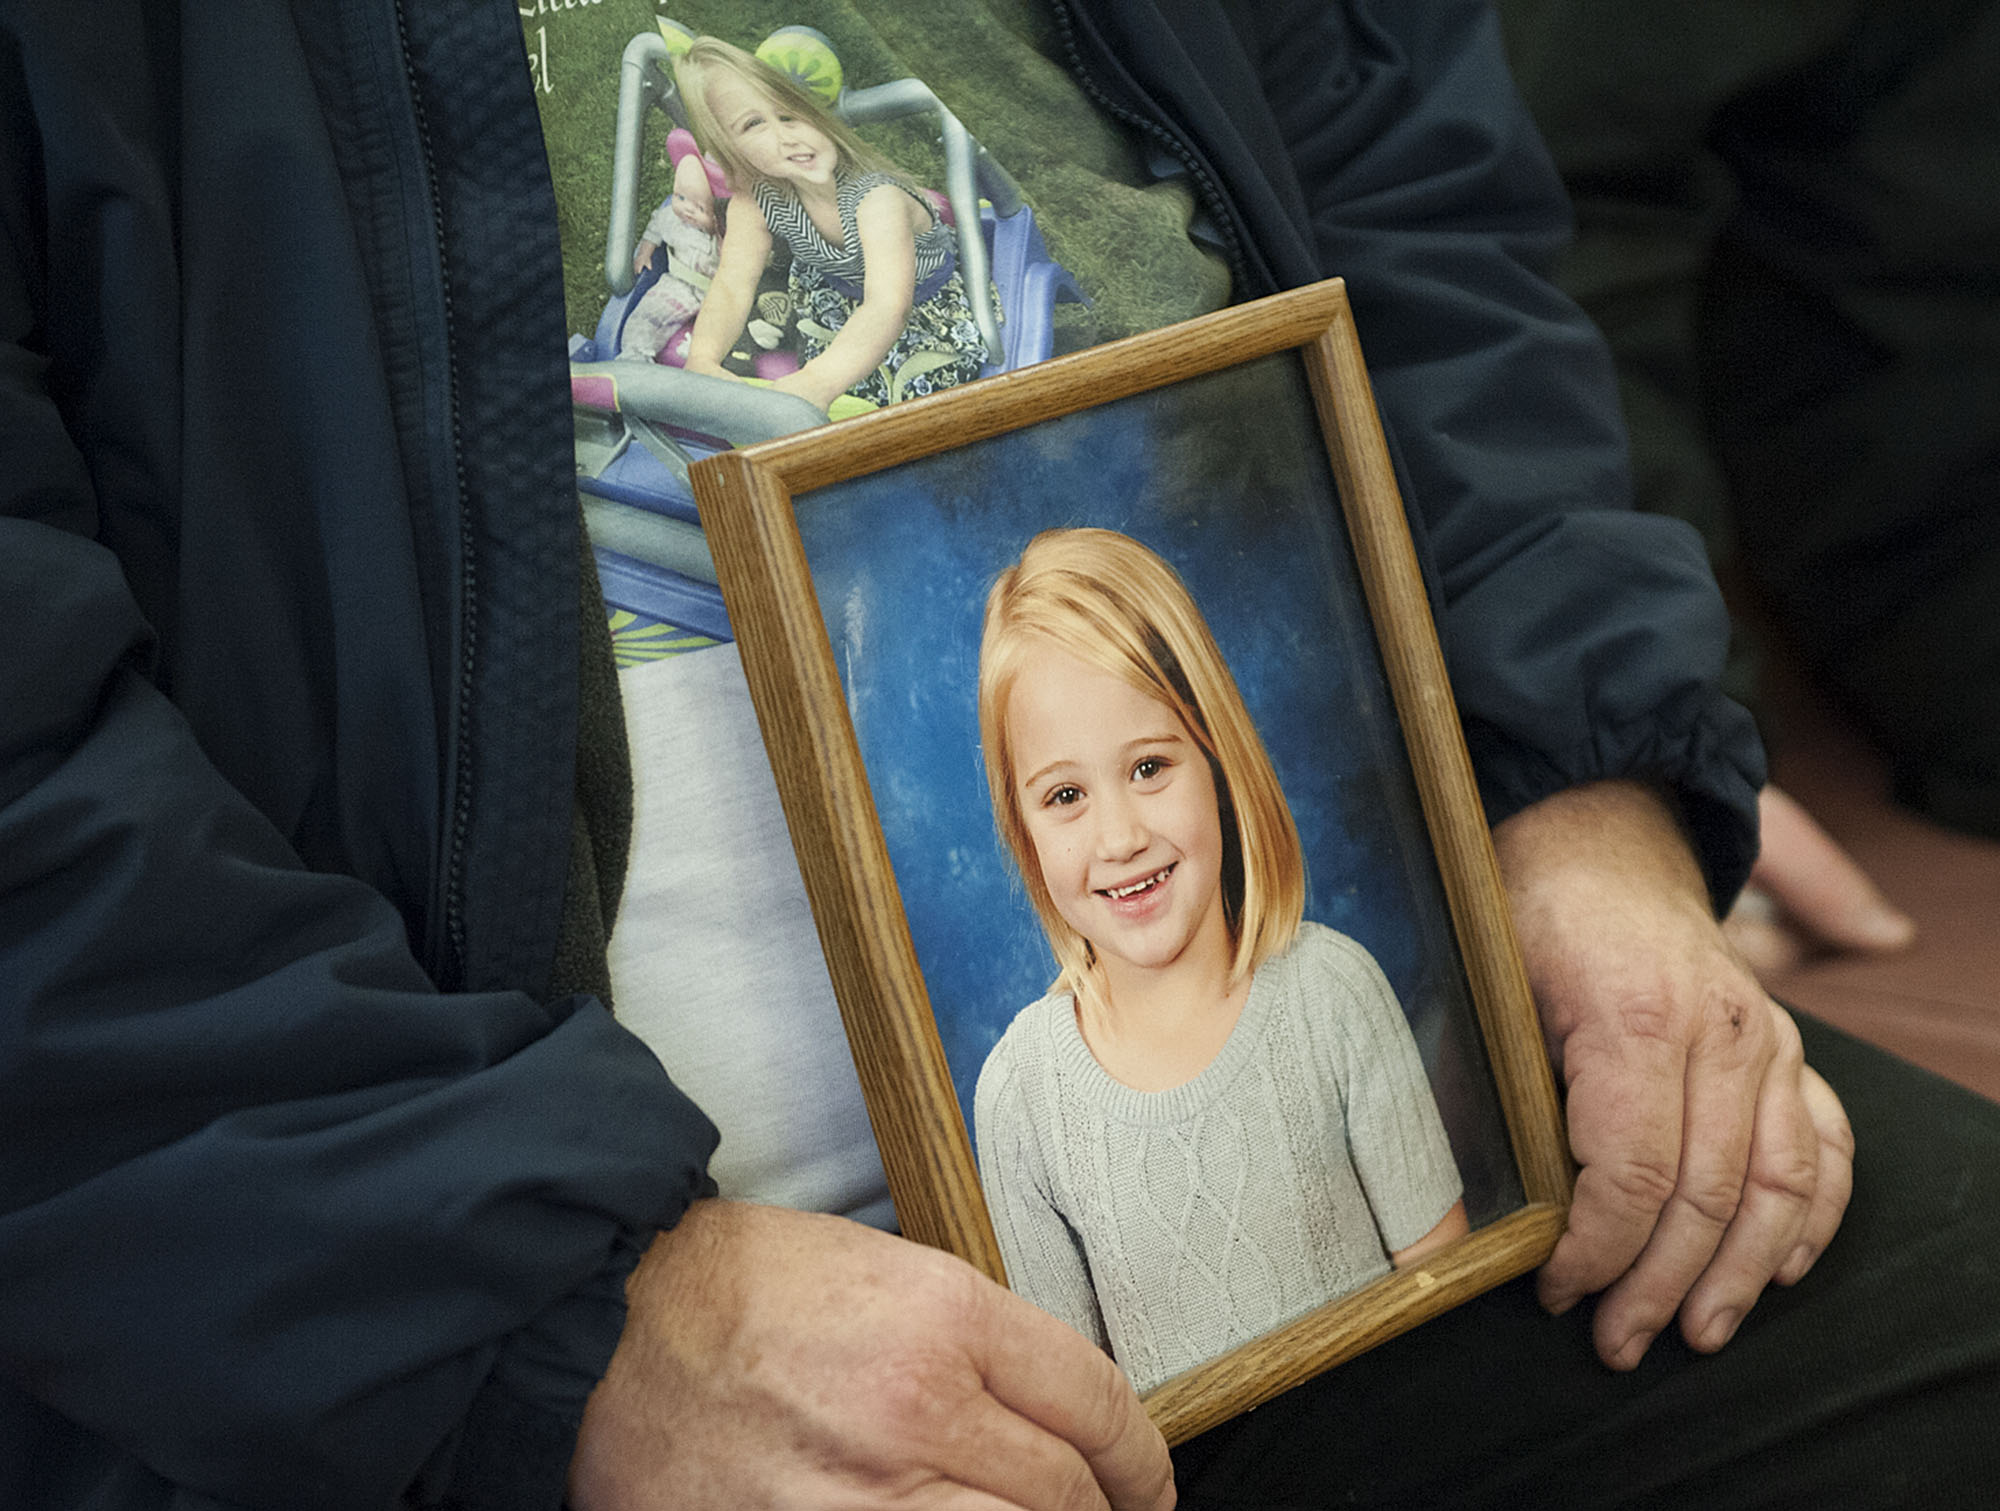 Friends and relatives of Cadence Boyer held photos of her during the sentencing of Duane C. Abbott in November 2015 at the Clark County Courthouse.